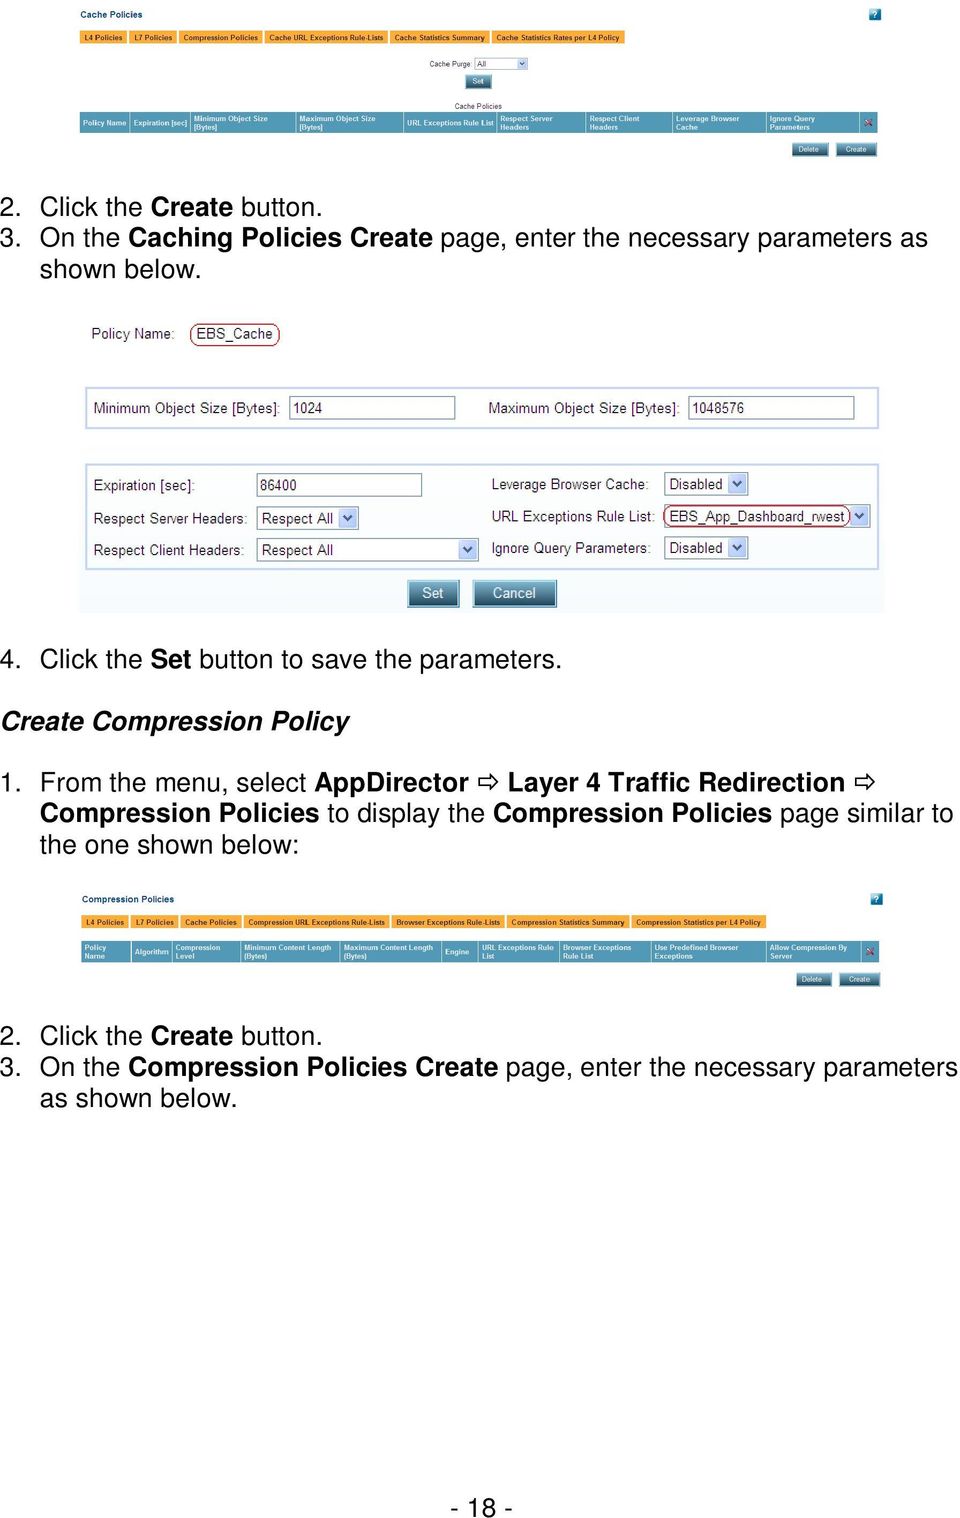 From the menu, select AppDirector Layer 4 Traffic Redirection Compression Policies to display the Compression Policies